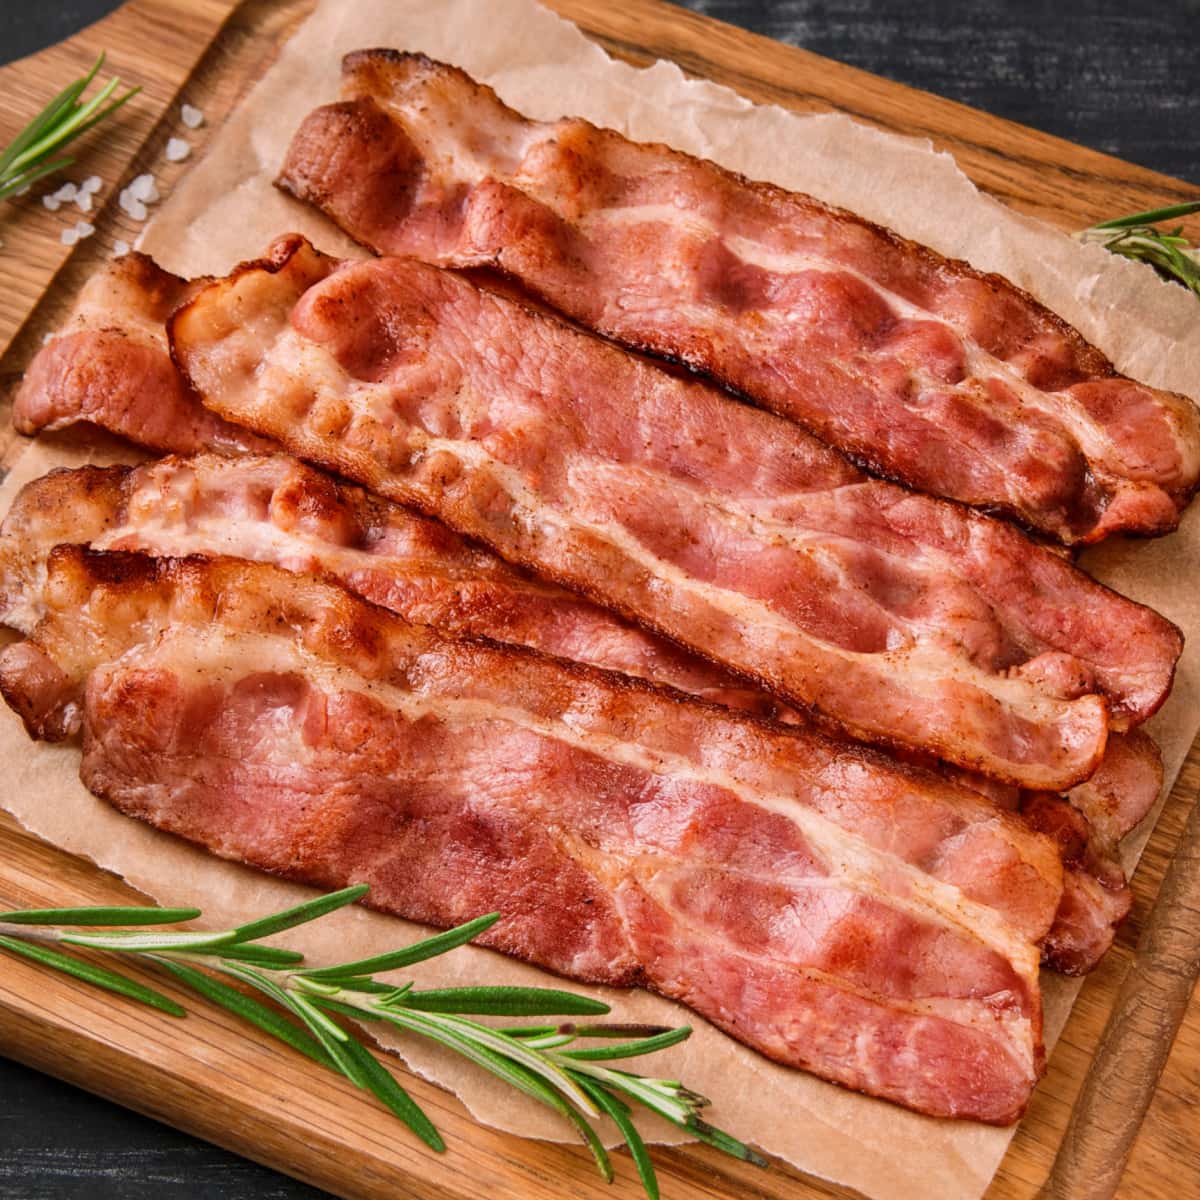 https://insanelygoodrecipes.com/wp-content/uploads/2023/05/Bacon-on-a-Wooden-Cutting-Board.jpg